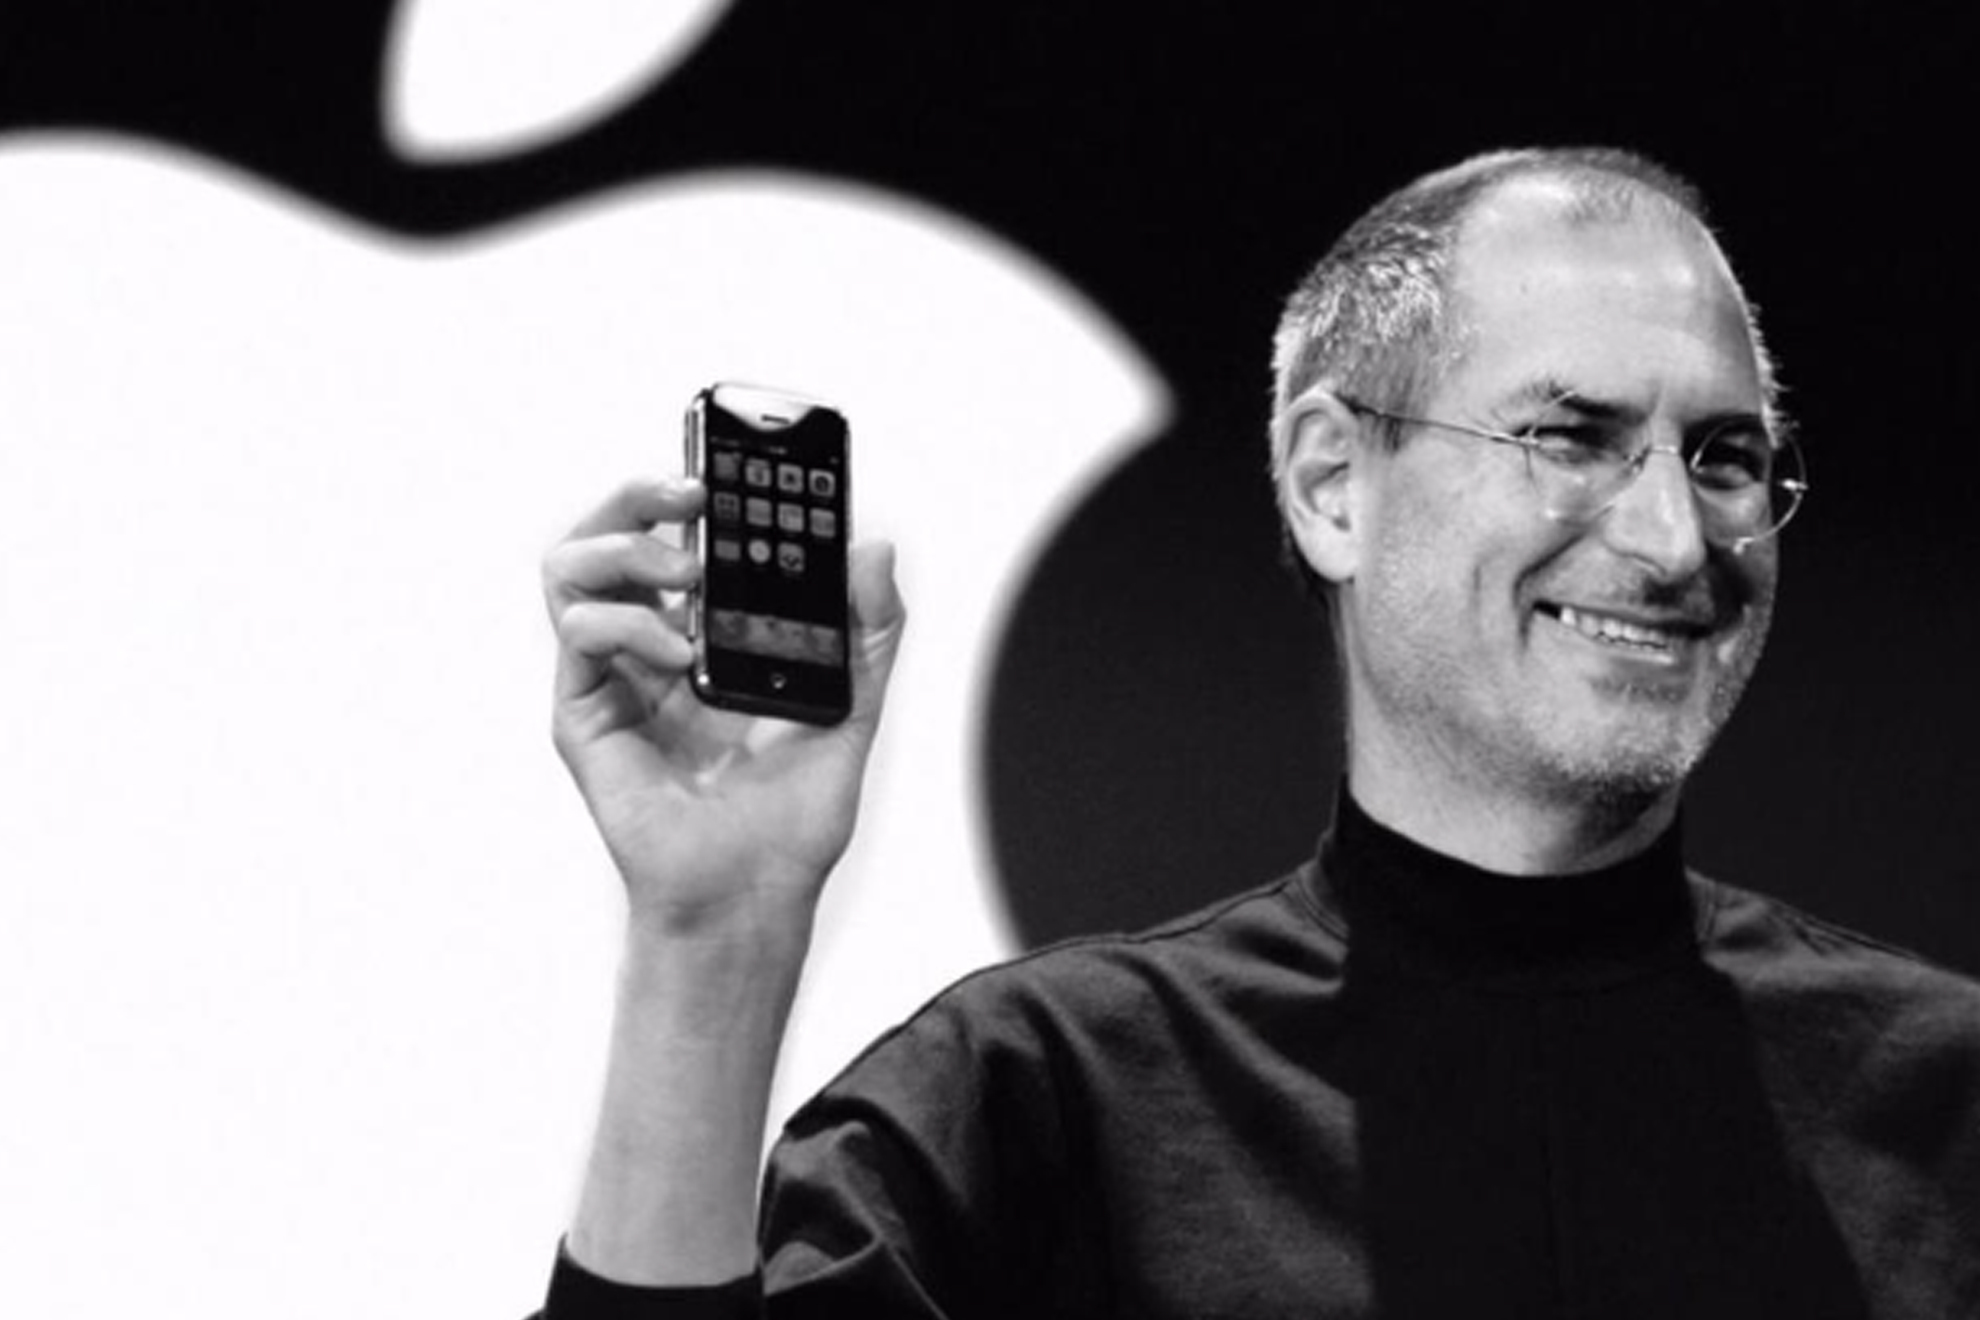 Steve Jobs' most valuable items auctioned off for huge sums